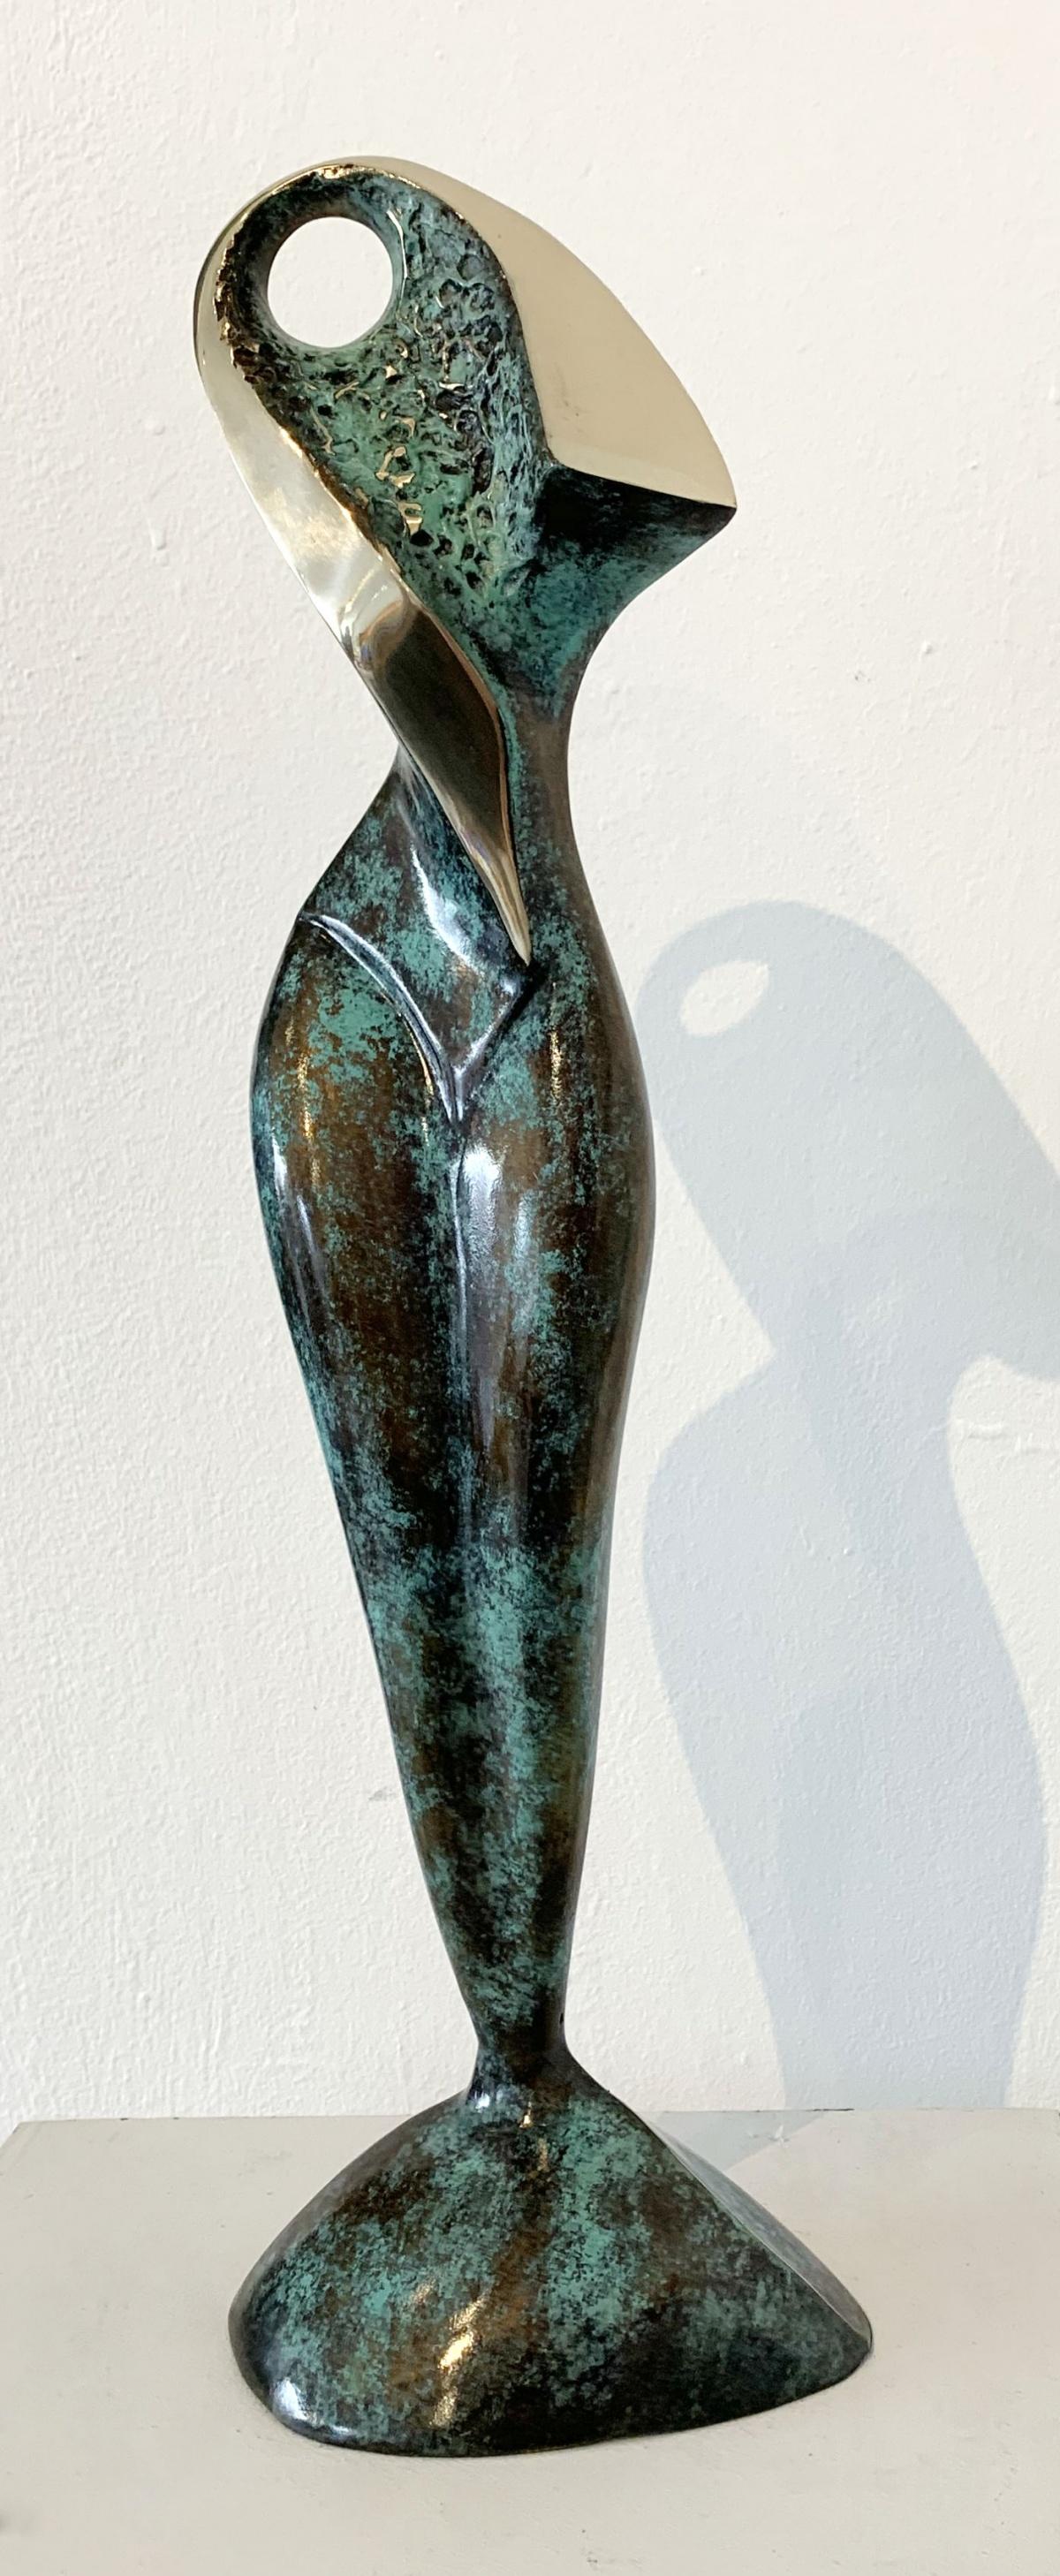 Stanisław Wysocki Abstract Sculpture - Muse - XXI century Contemporary bronze sculpture, Abstract & figurative